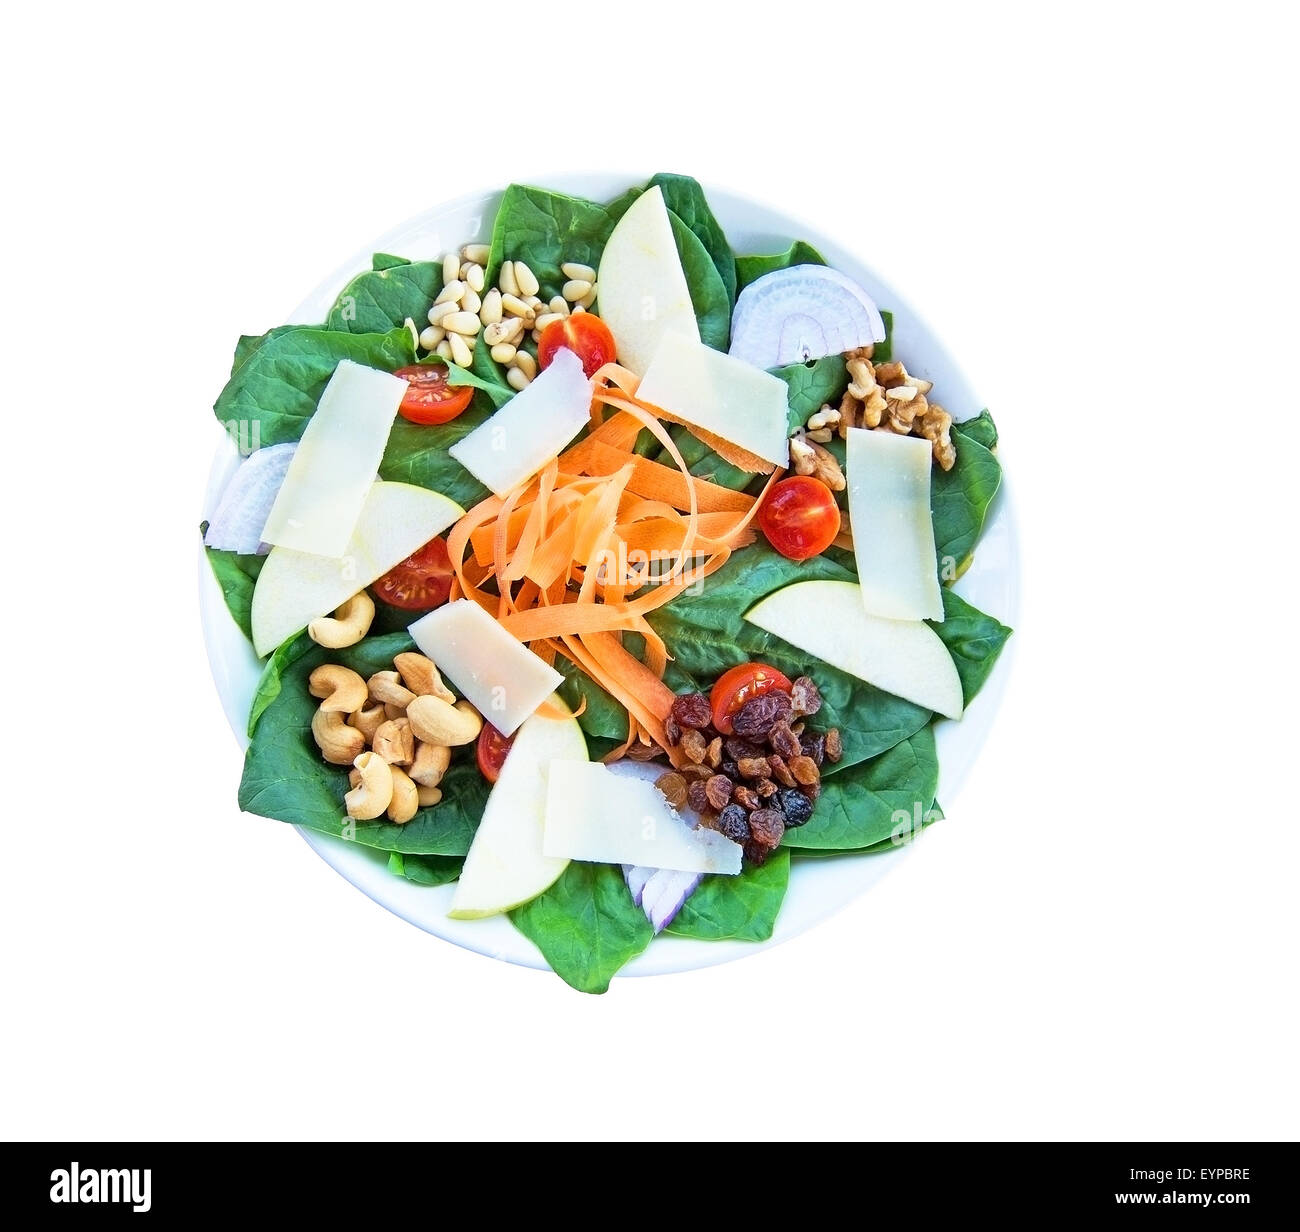 Fresh spinach salad with parmesan, nuts, carrots, tomatoes, pear, nuts and raisins. Food on white plate. Stock Photo